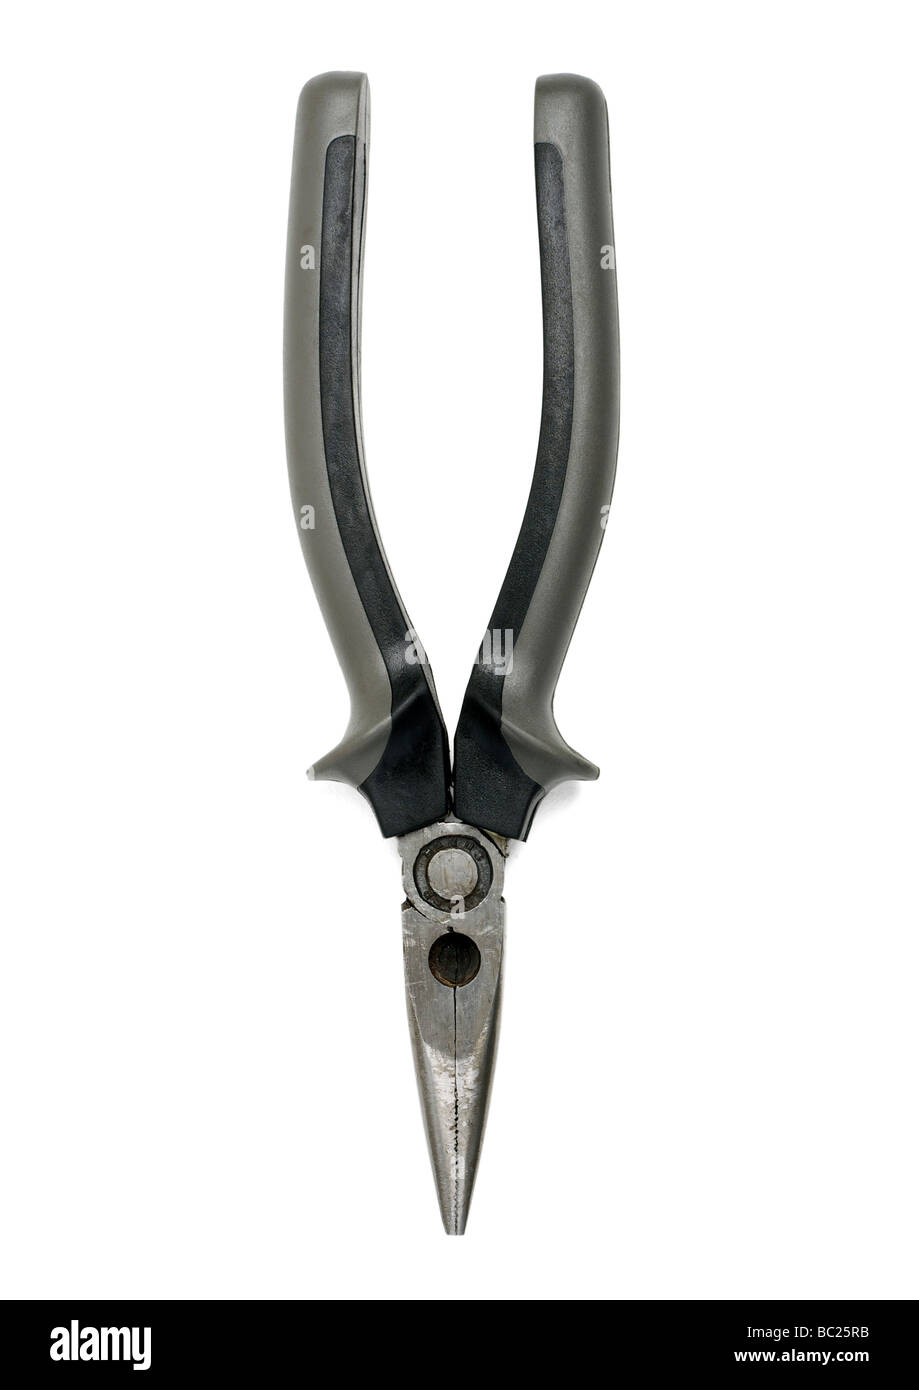 Long nose pliers on white background Stock Photo